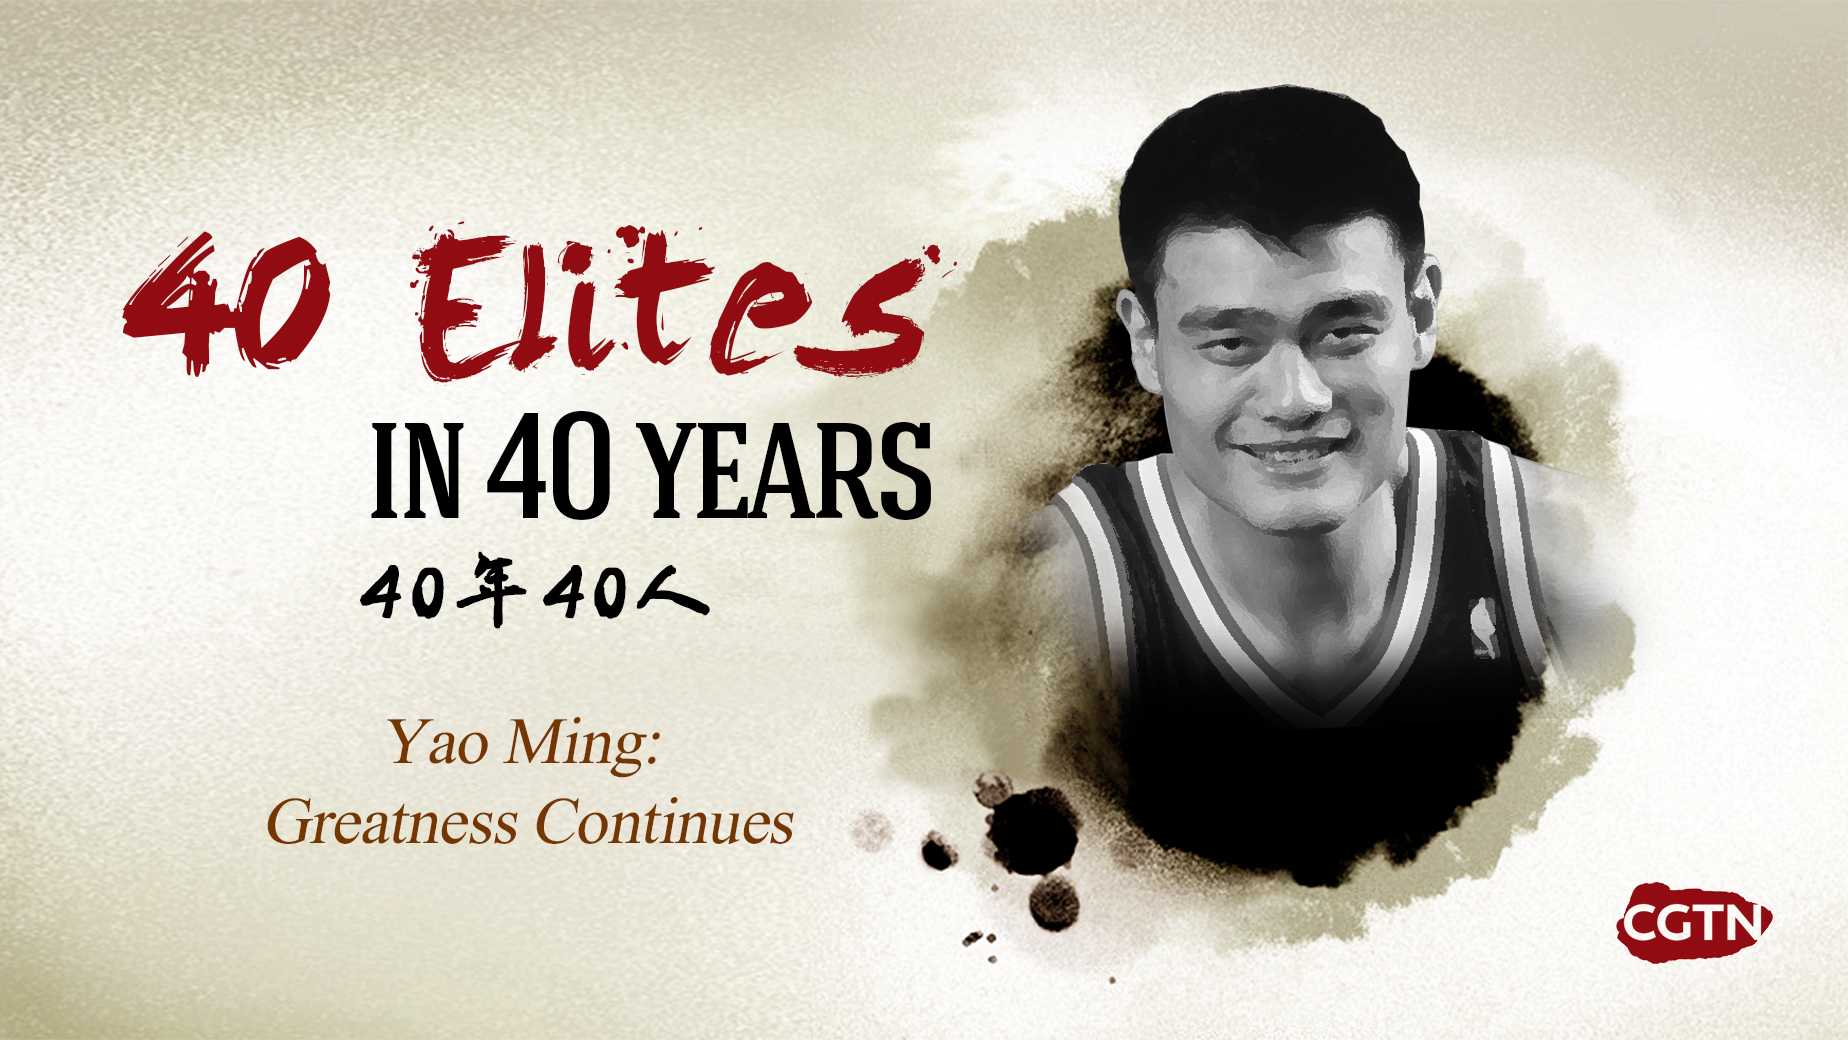 40 Elites in 40 Years: Yao Ming: Greatness Continues - CGTN